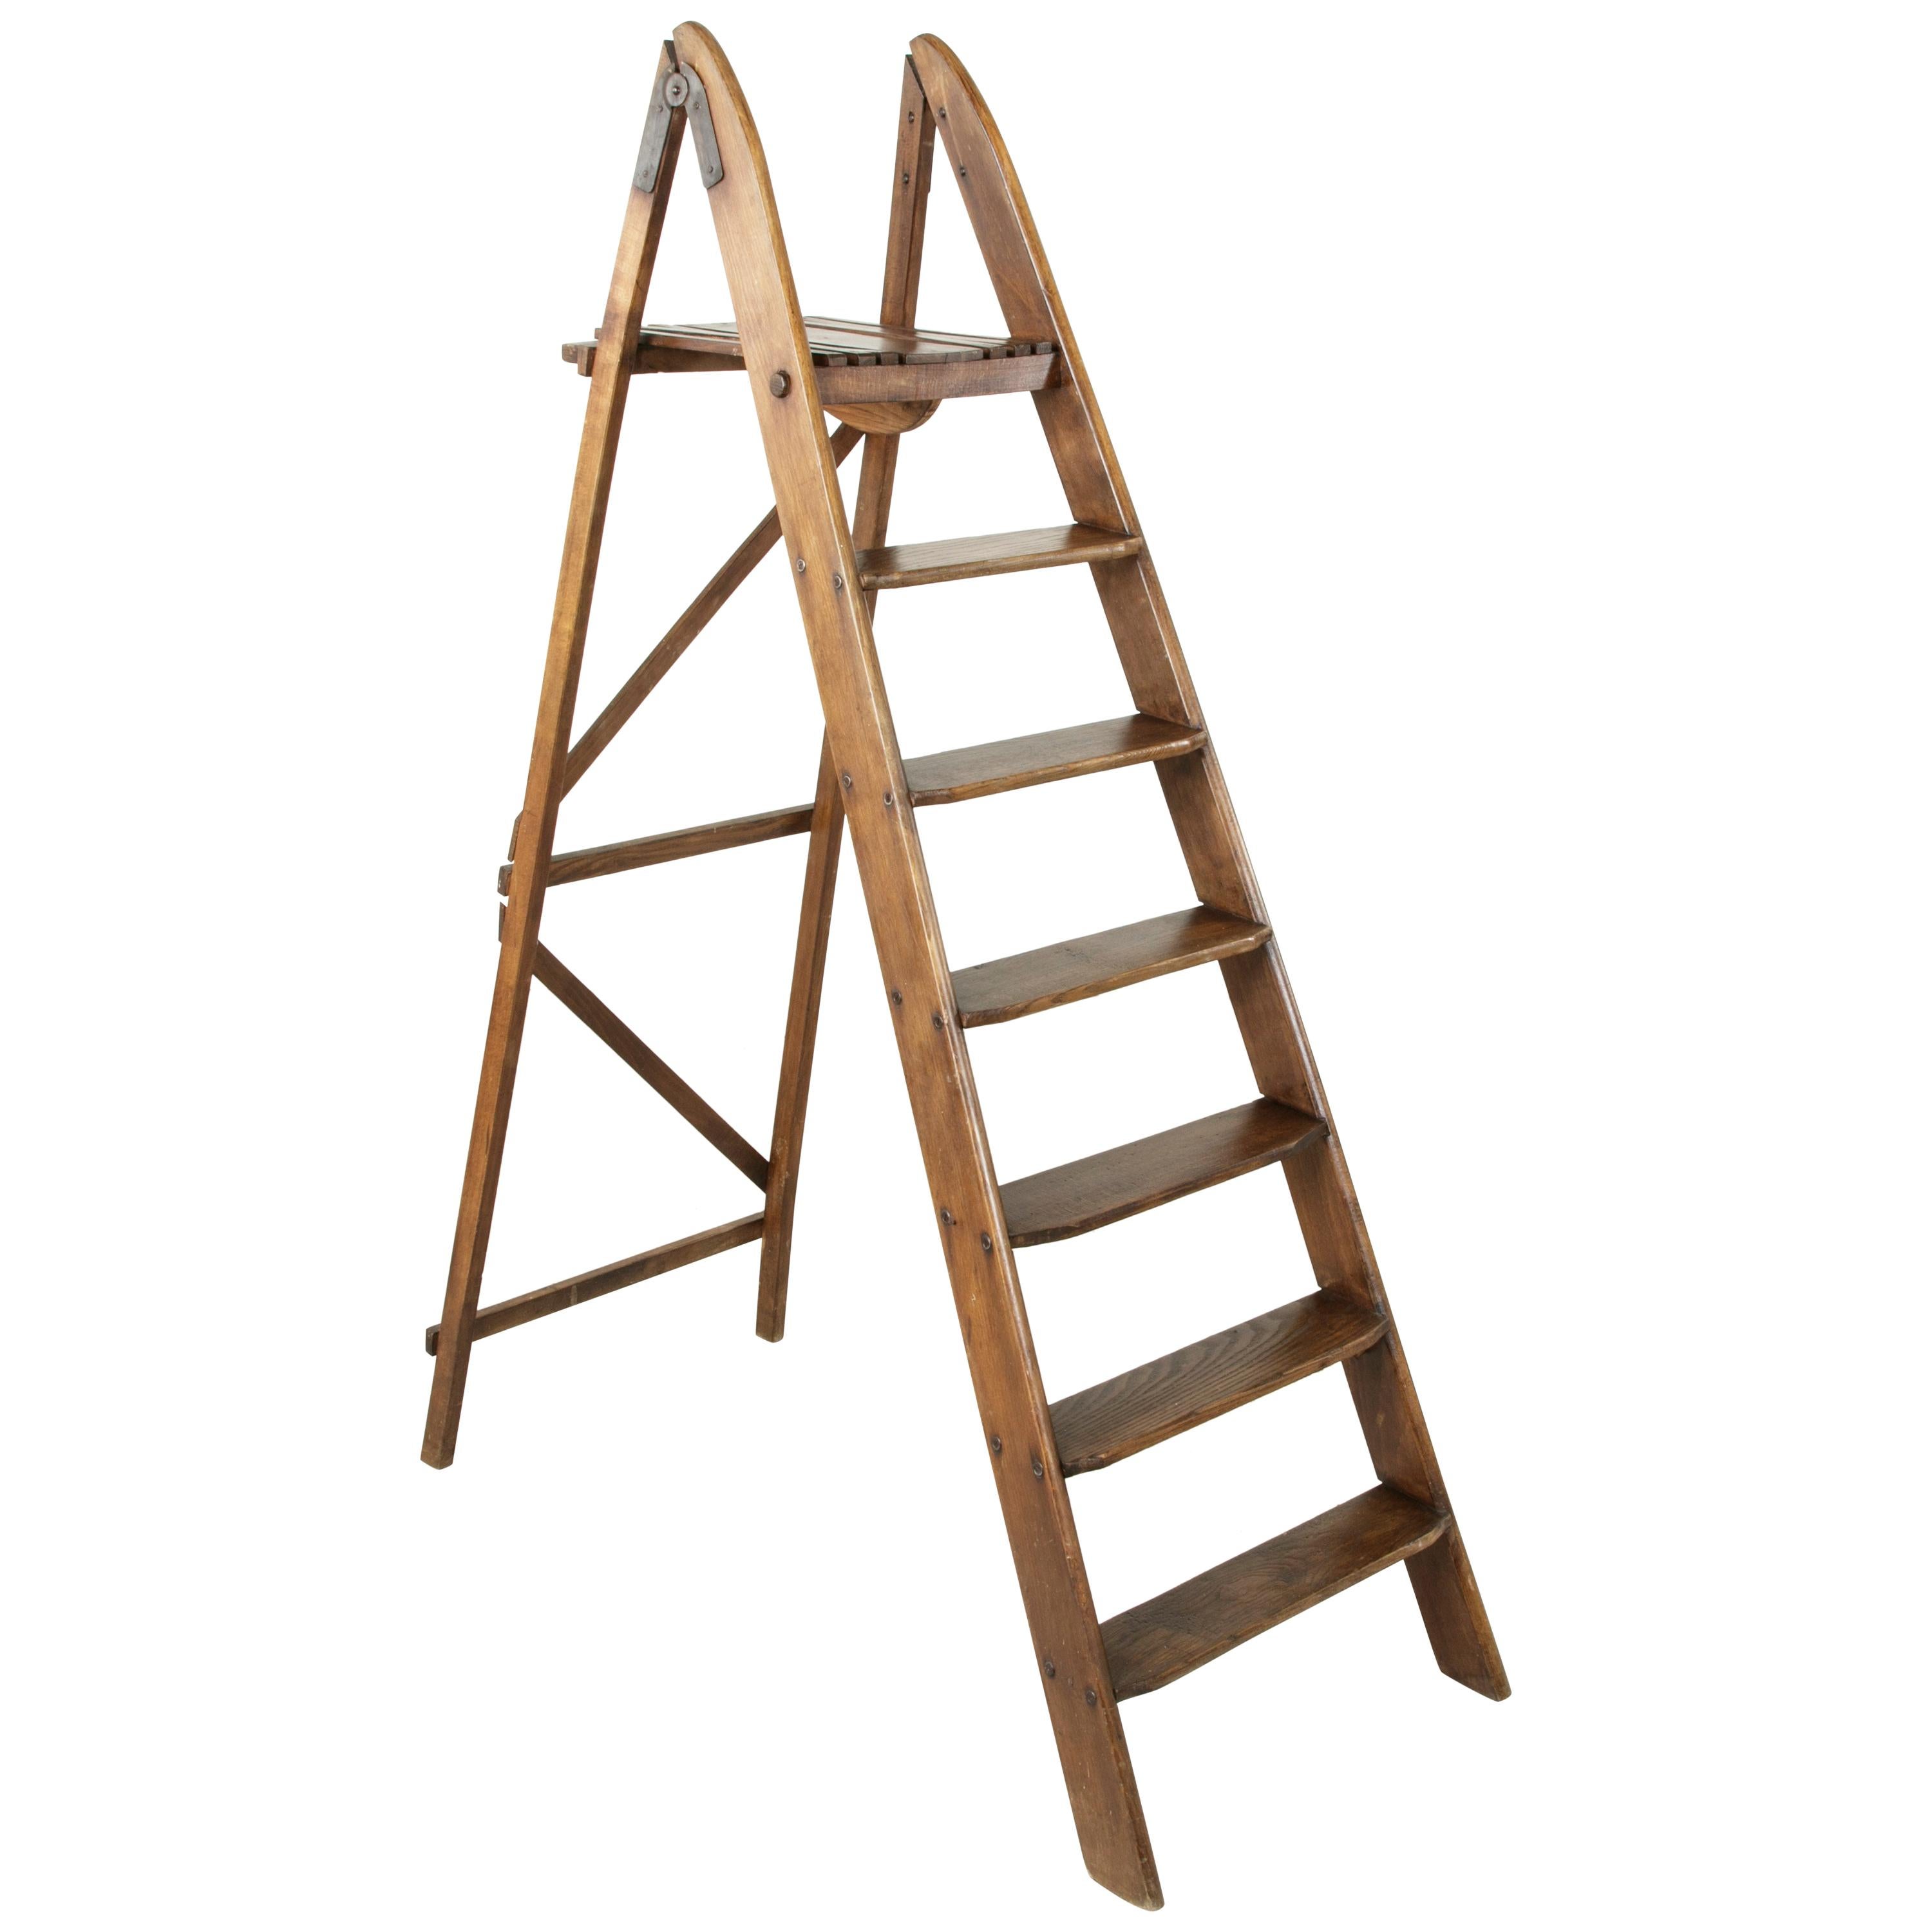 French Artisan-Made Oak Library Ladder with Platform Top, Iron Hinges circa 1900